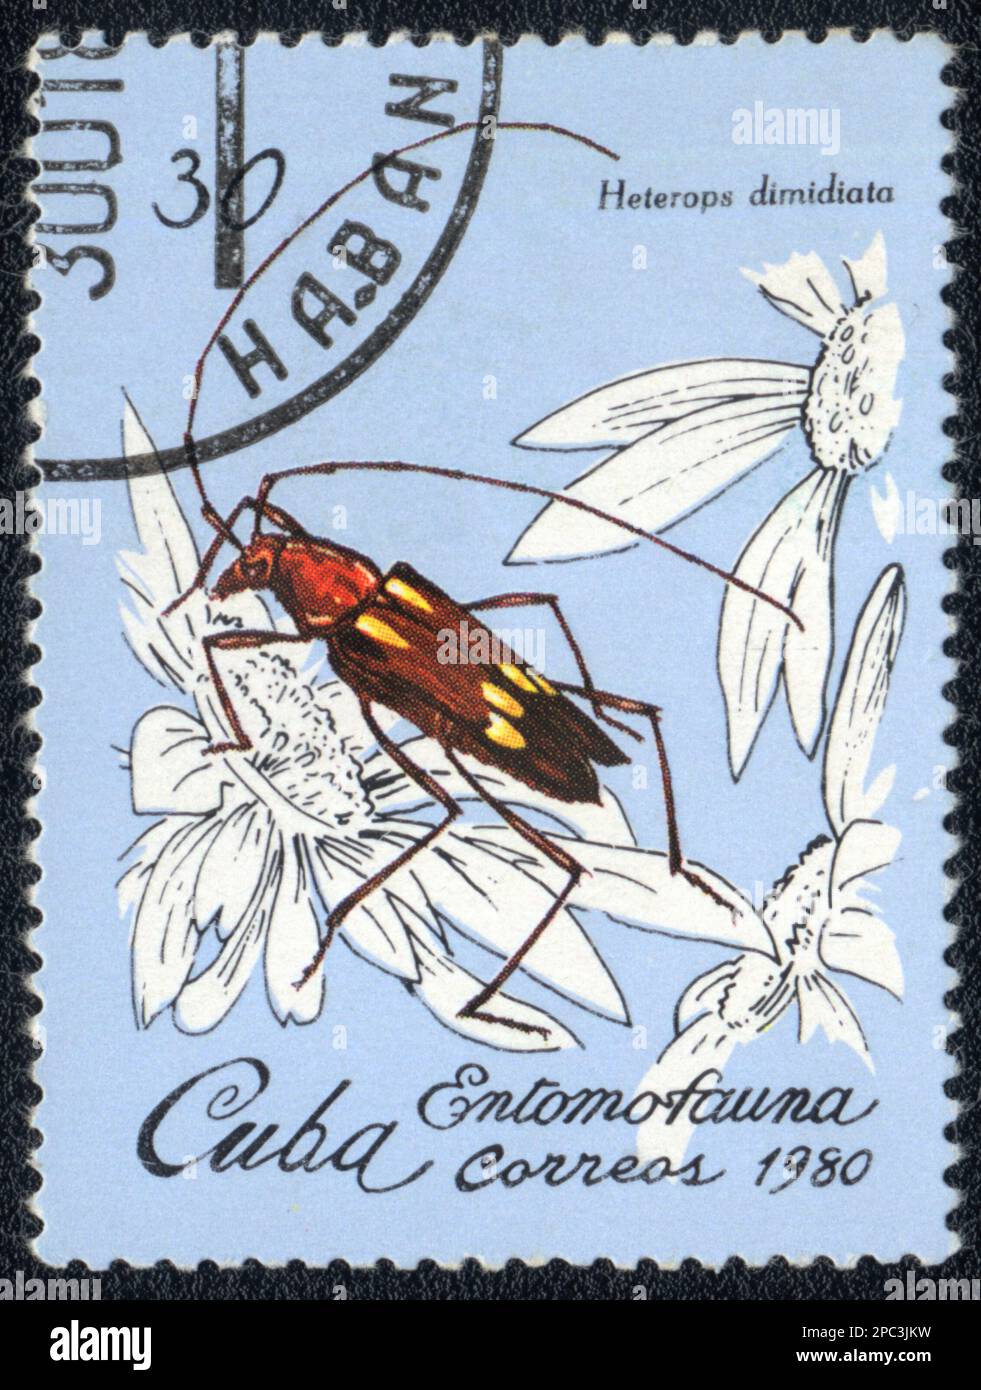 A Stamp printed in CUBA shows image of a Heterops dimidiata beetle, from series - entomofauna, 1980 Stock Photo